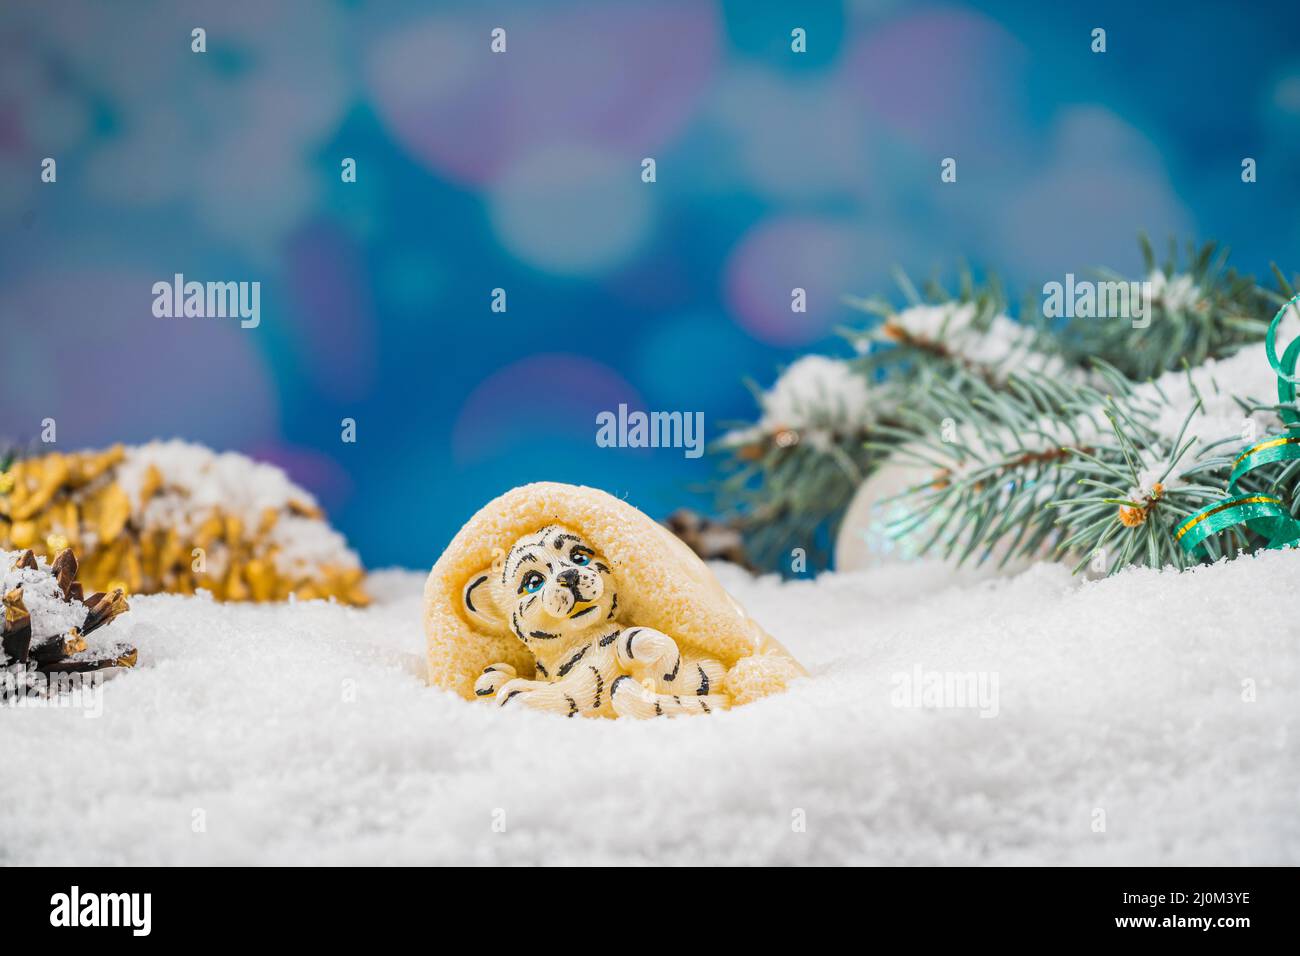 Christmas chocolate toy on snow. Chocolate toy in the shape of a tiger, symbol of the year 2022. Joyful mood. Stock Photo